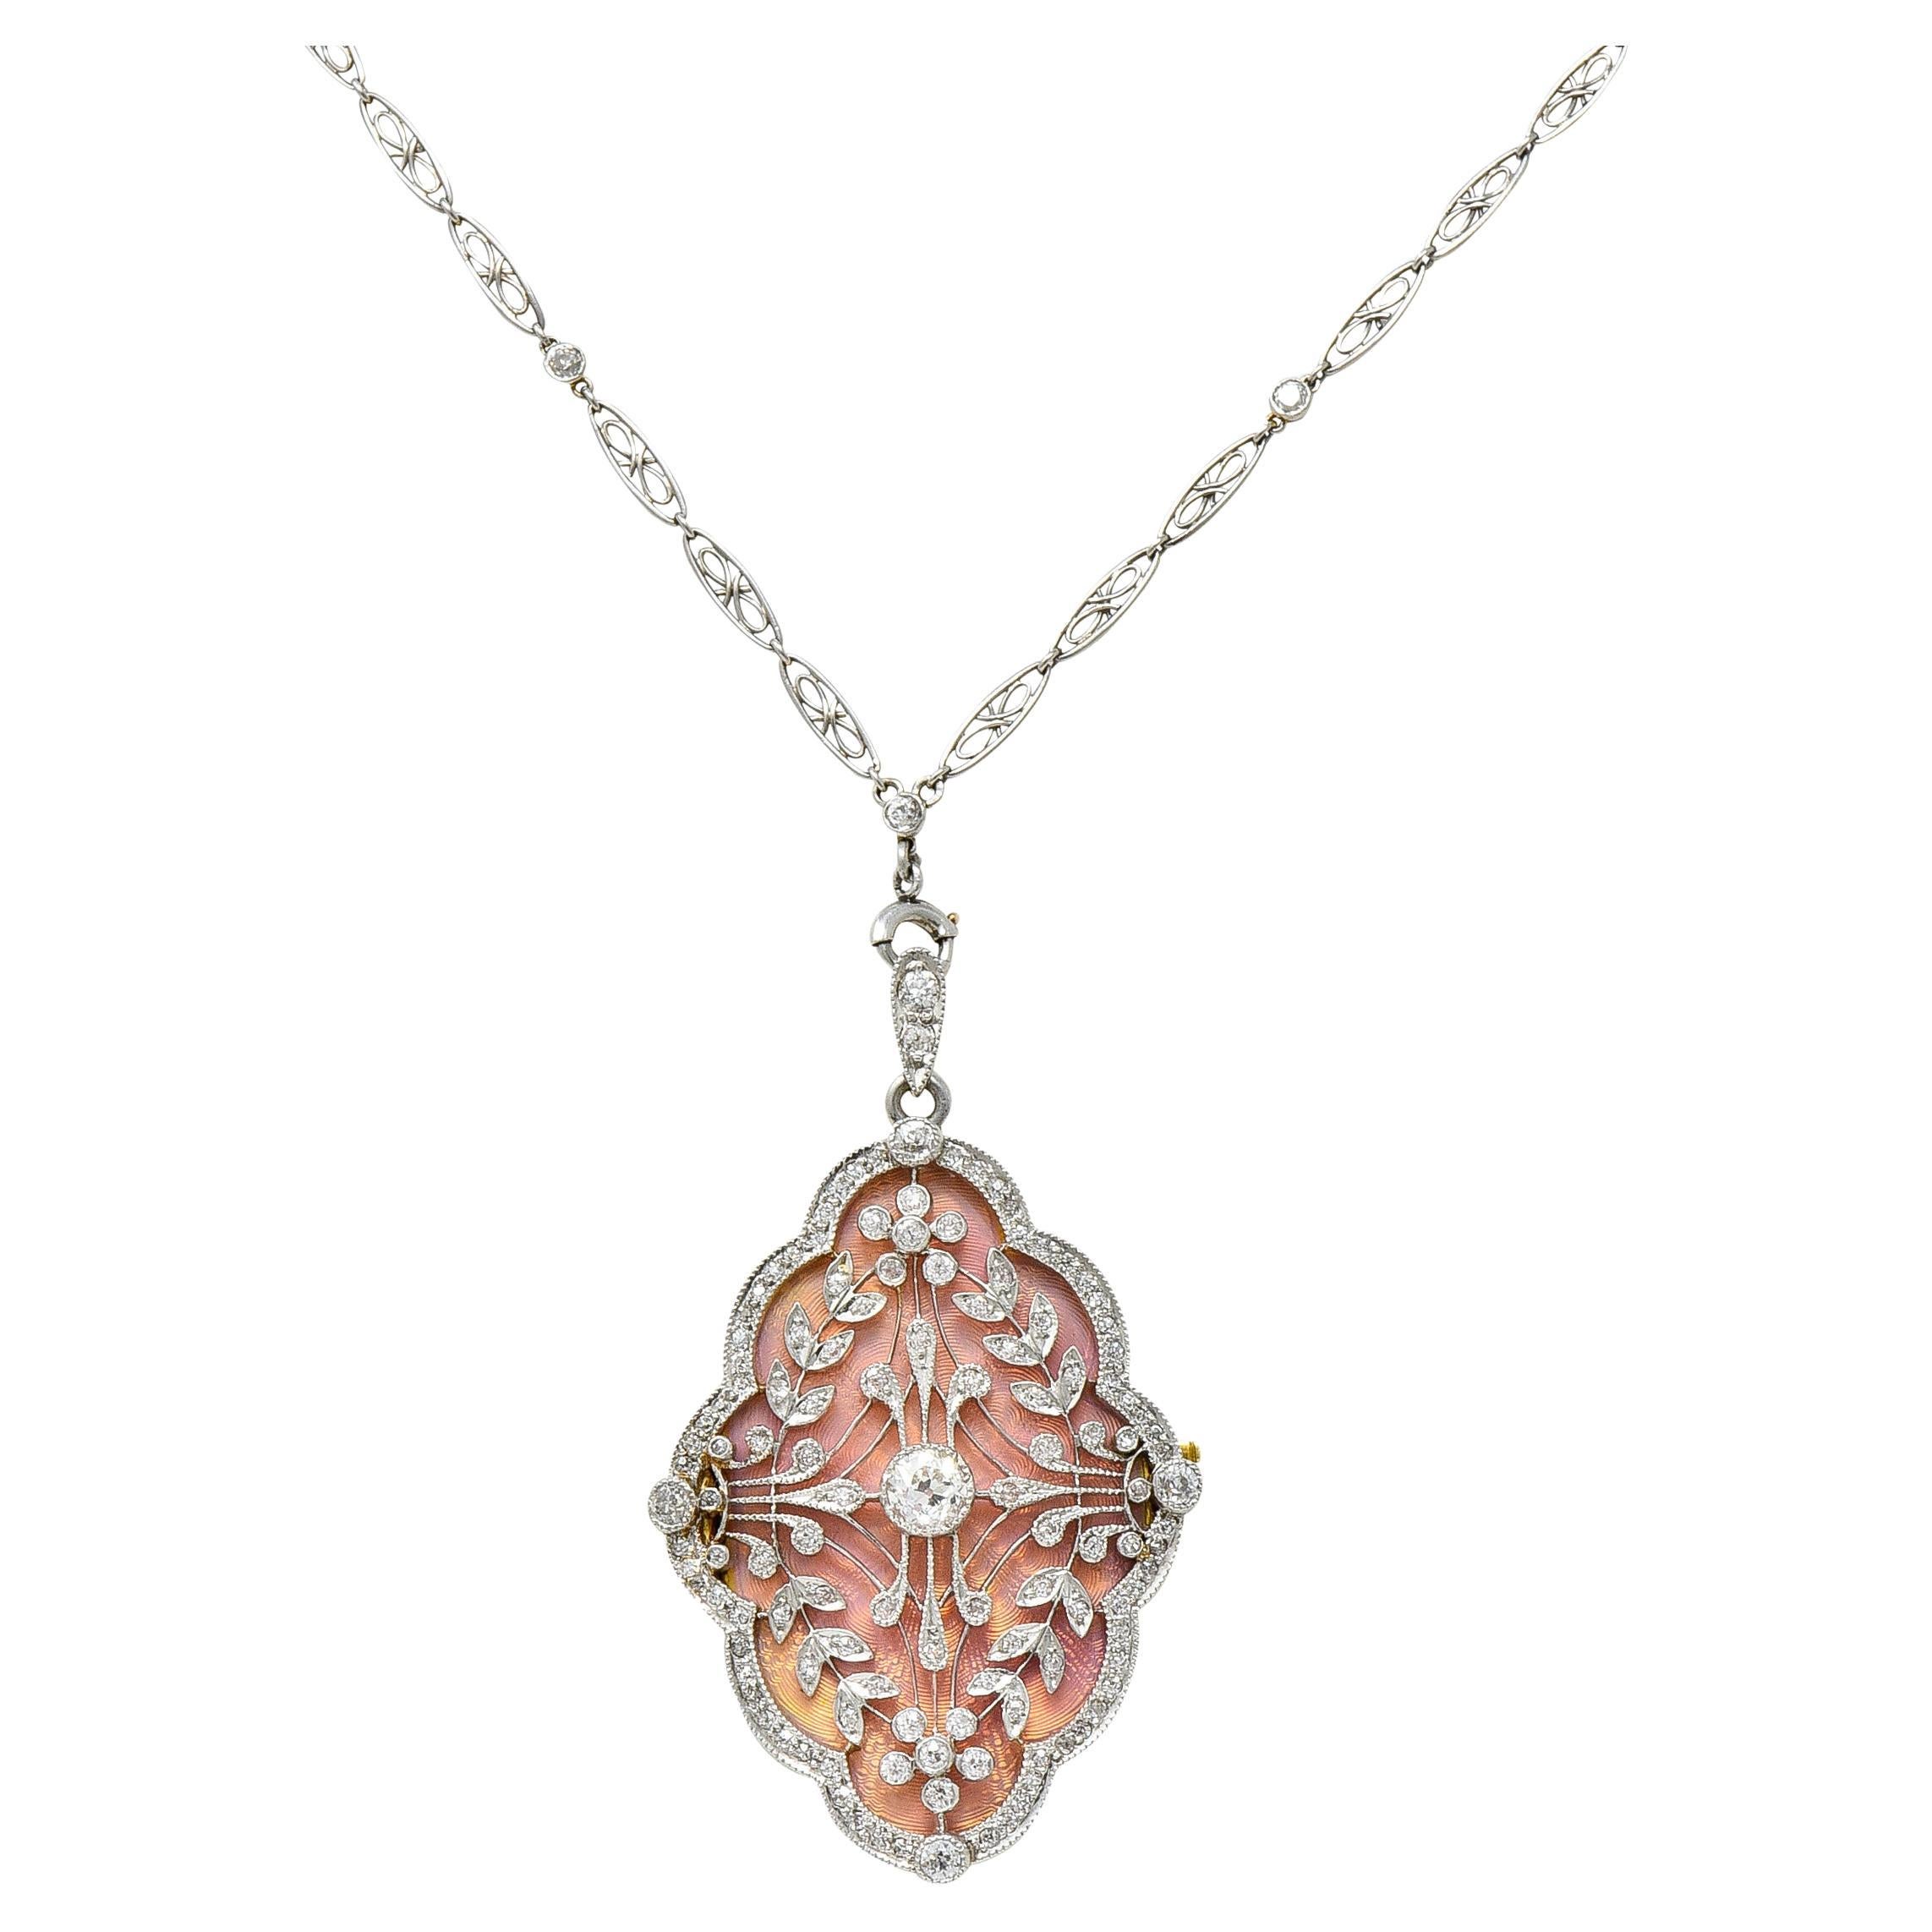 Antique diamond-by-the-yard necklace is comprised of decorative filigree links with diamond stations. Completed by a spring ring clasp and terminates as a spring ring bale. Suspending an ornate statement pendant designed as floral lattice work with